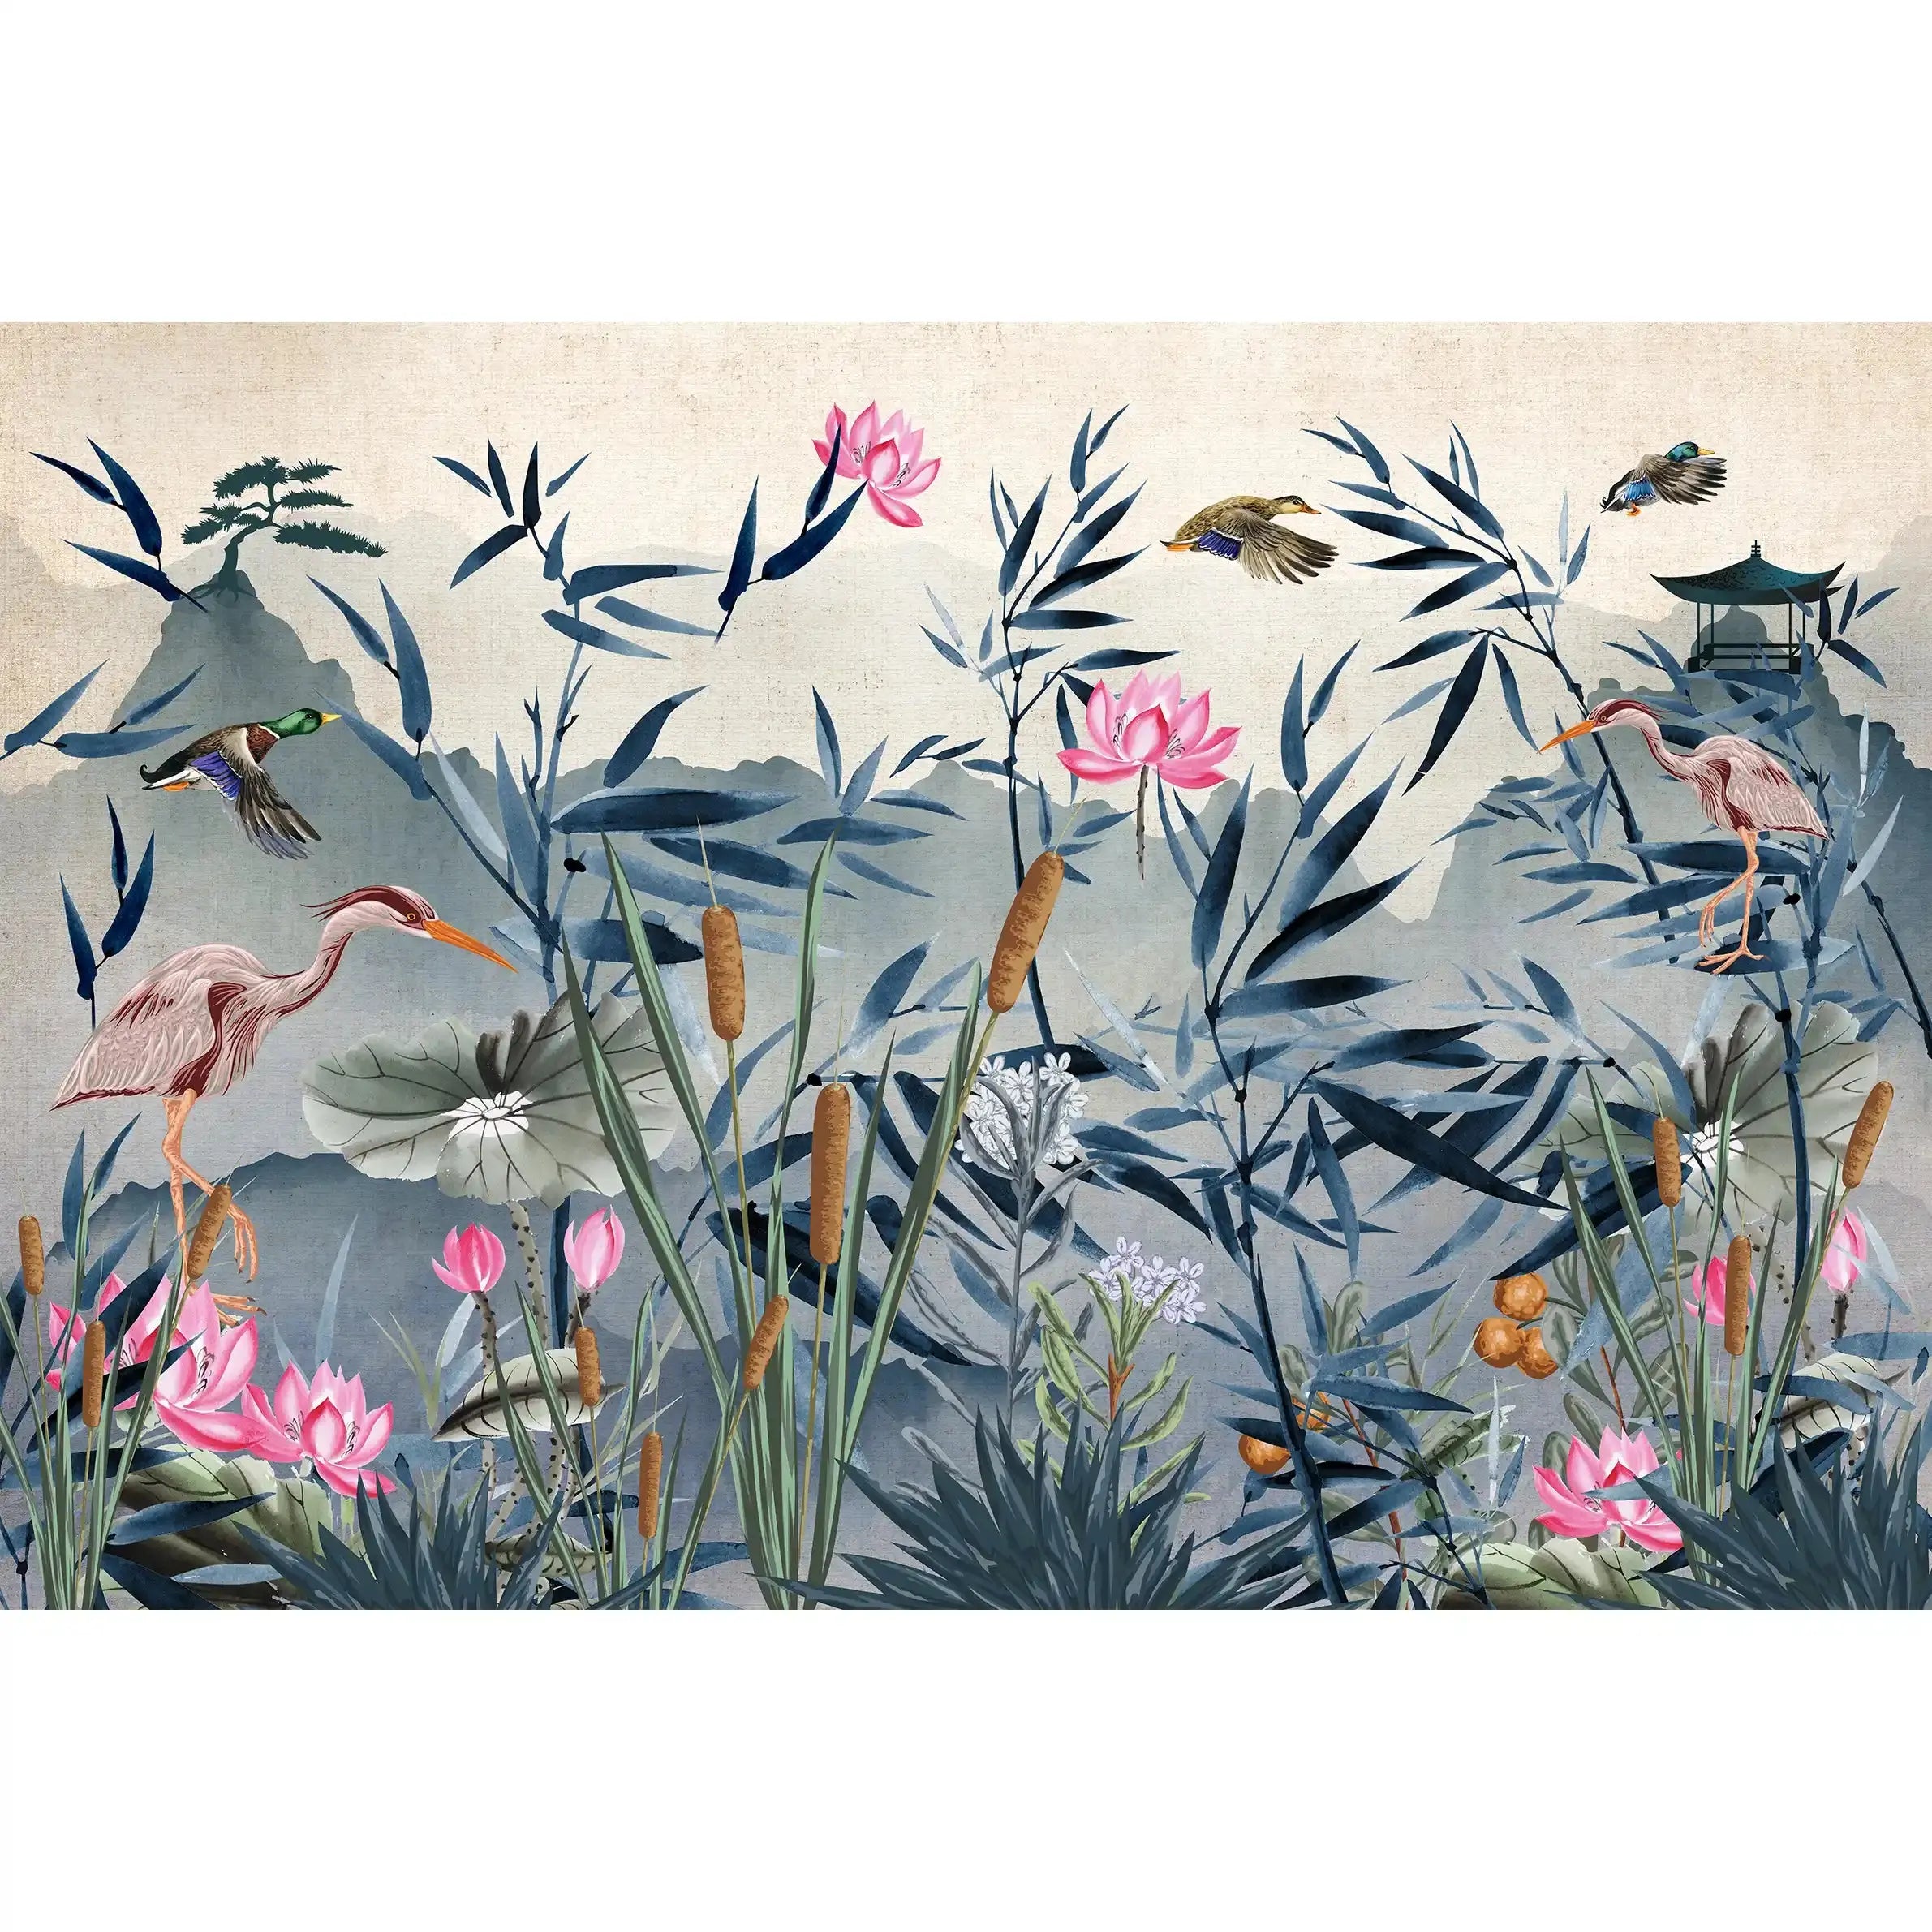 3057-A / Removable Wallpaper Peel and Stick - Watercolor Birds and Flowers, Oriental Painting Inspired, Easy Install, Wall Decor - Artevella